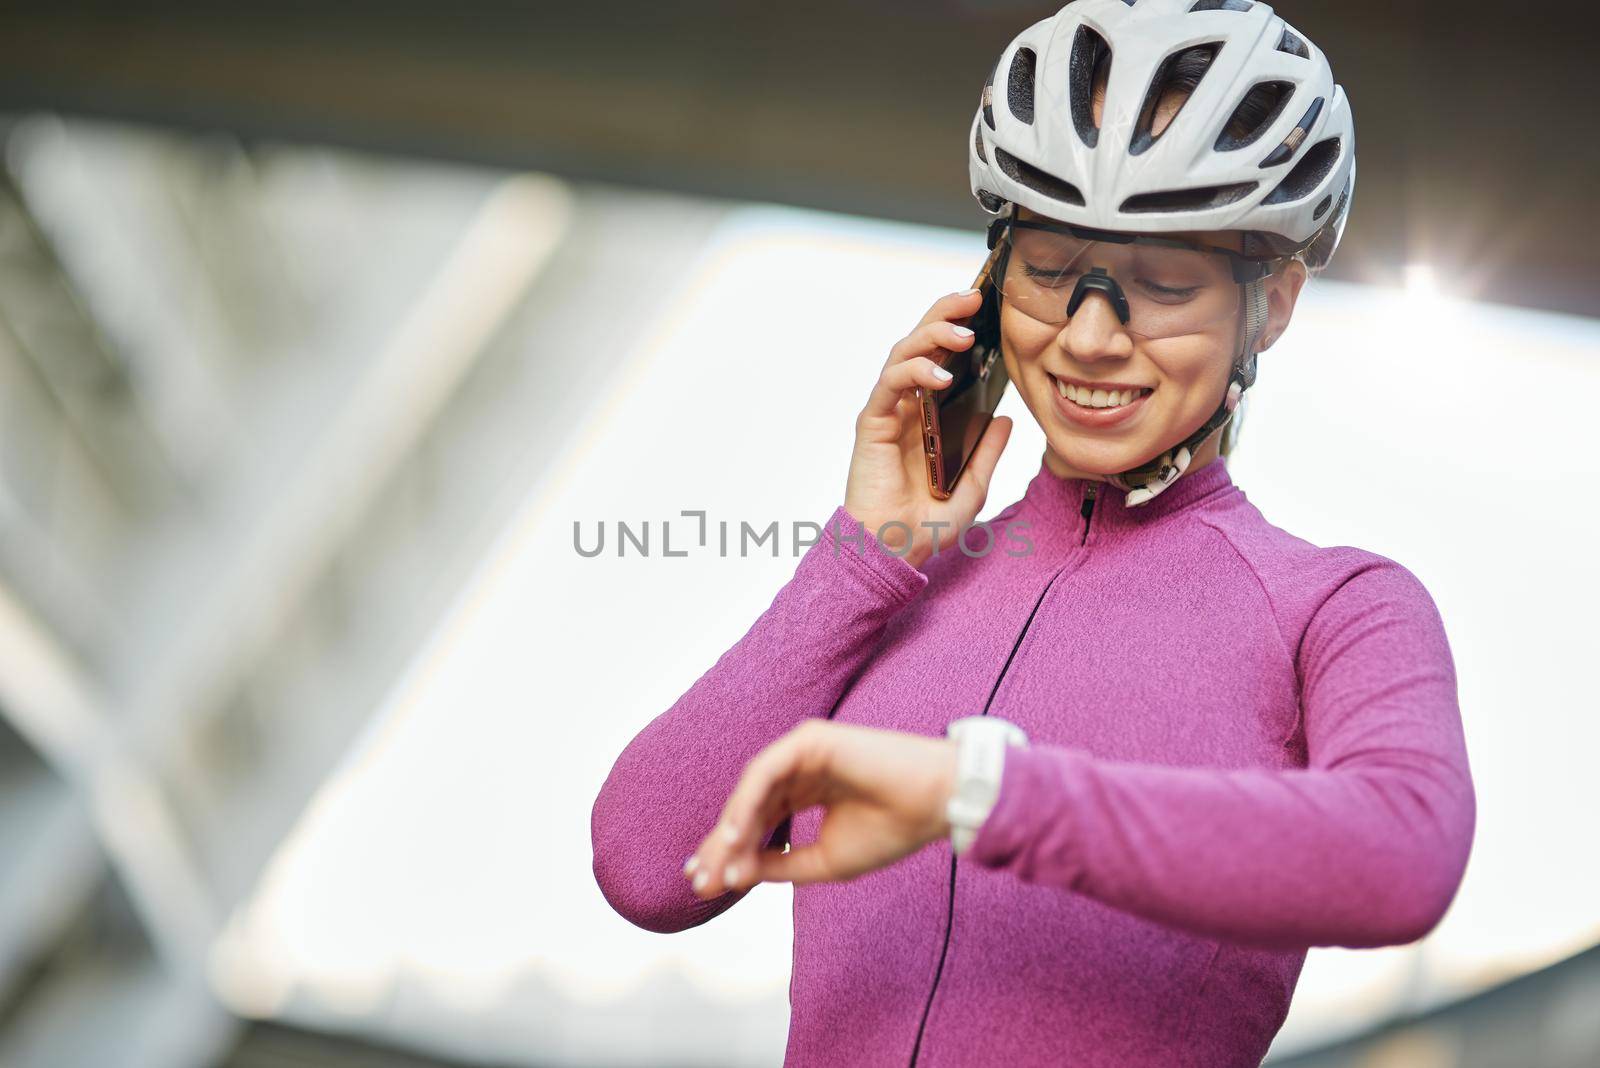 Cheerful young female cyclist wearing protective helmet and glasses looking at smartwatch on her wrist while talking on the phone, standing outdoors on a daytime by friendsstock